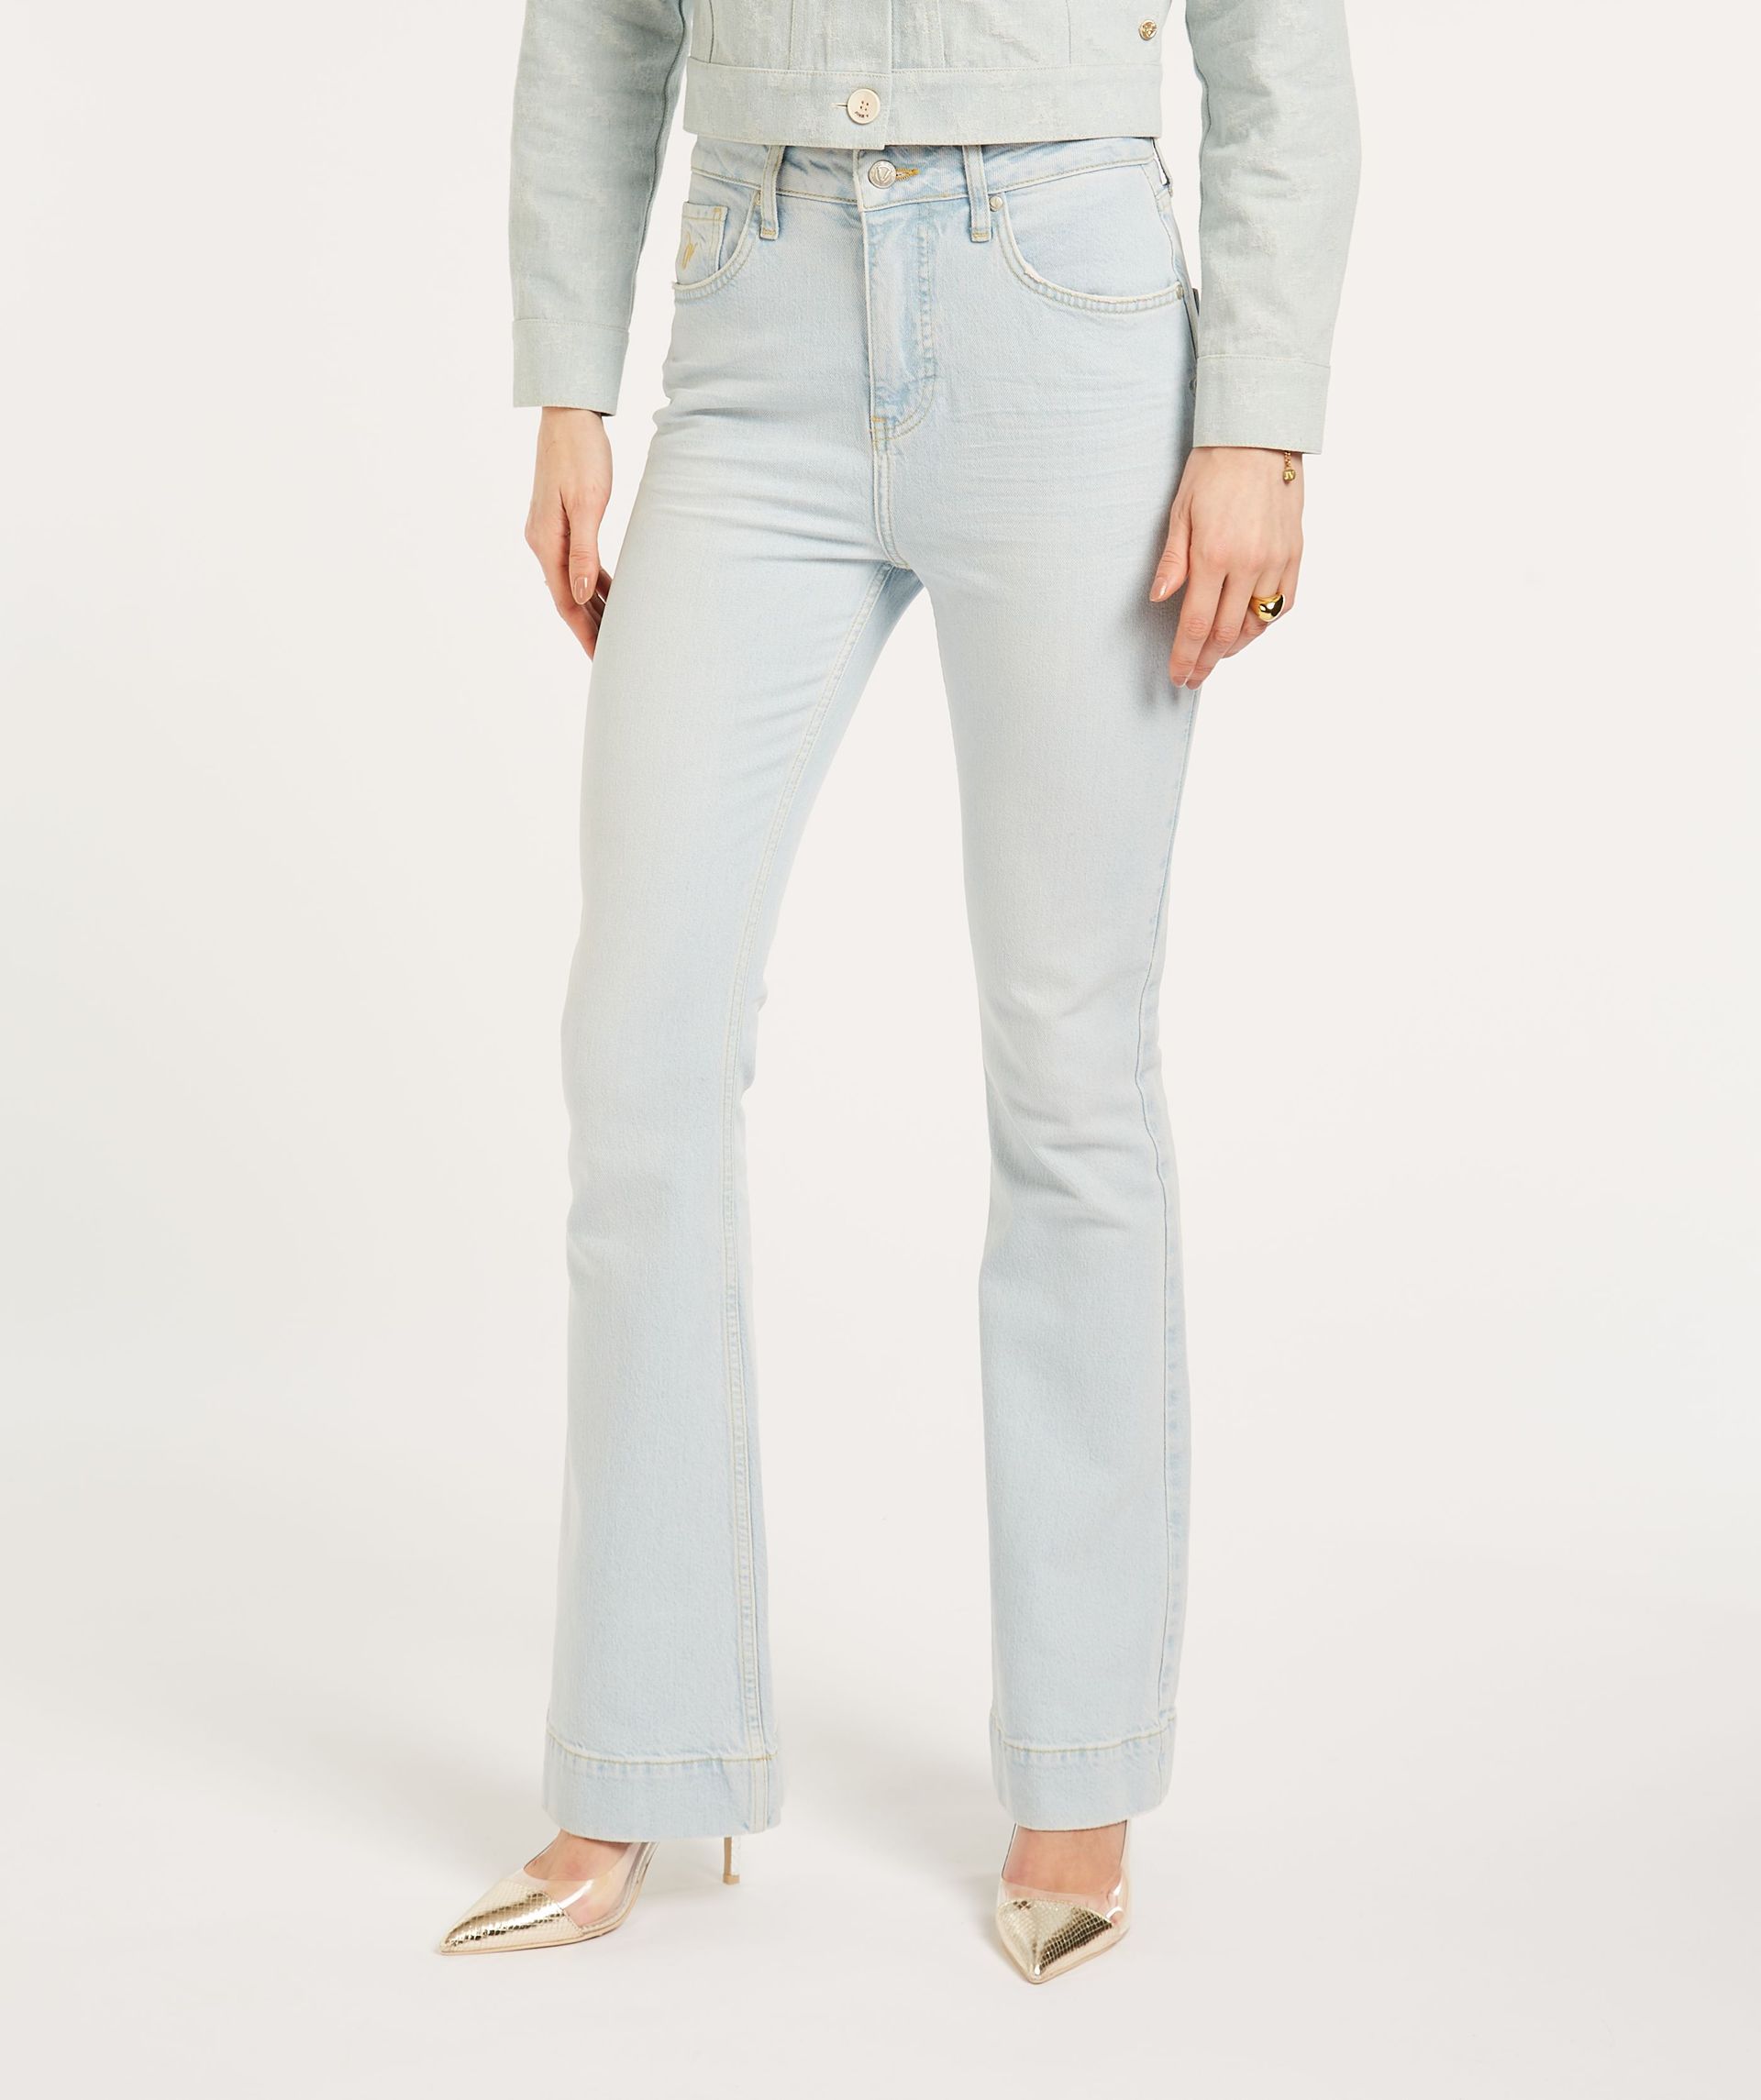 JILL fitted high rise flared jeans